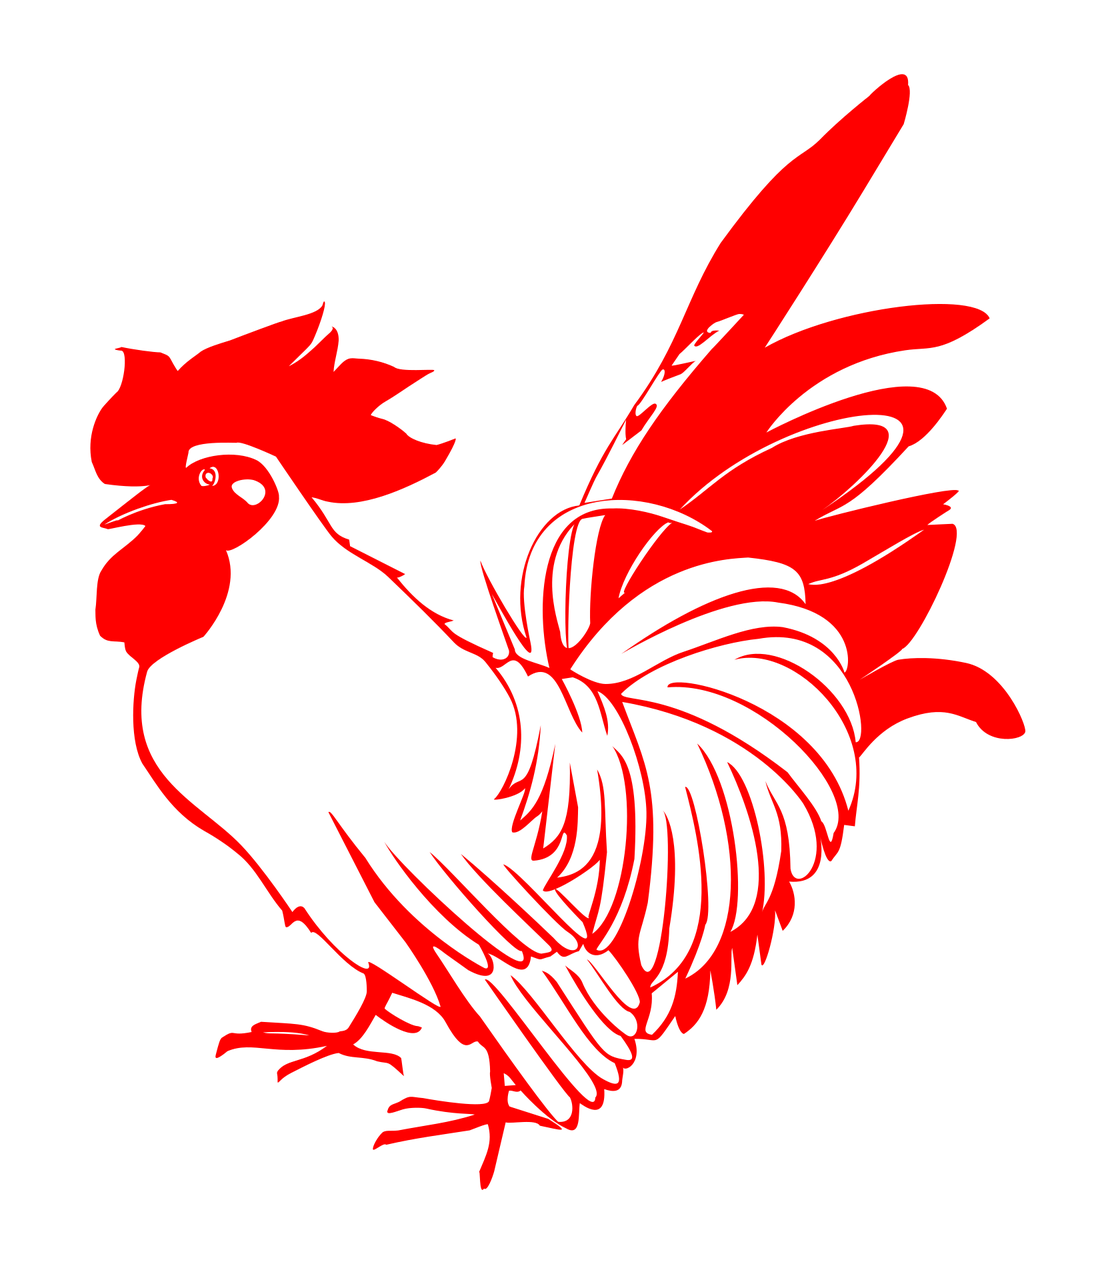 a red rooster on a black background, an illustration of, inspired by Kōno Michisei, sōsaku hanga, red neon, black stencil, mid shot photo